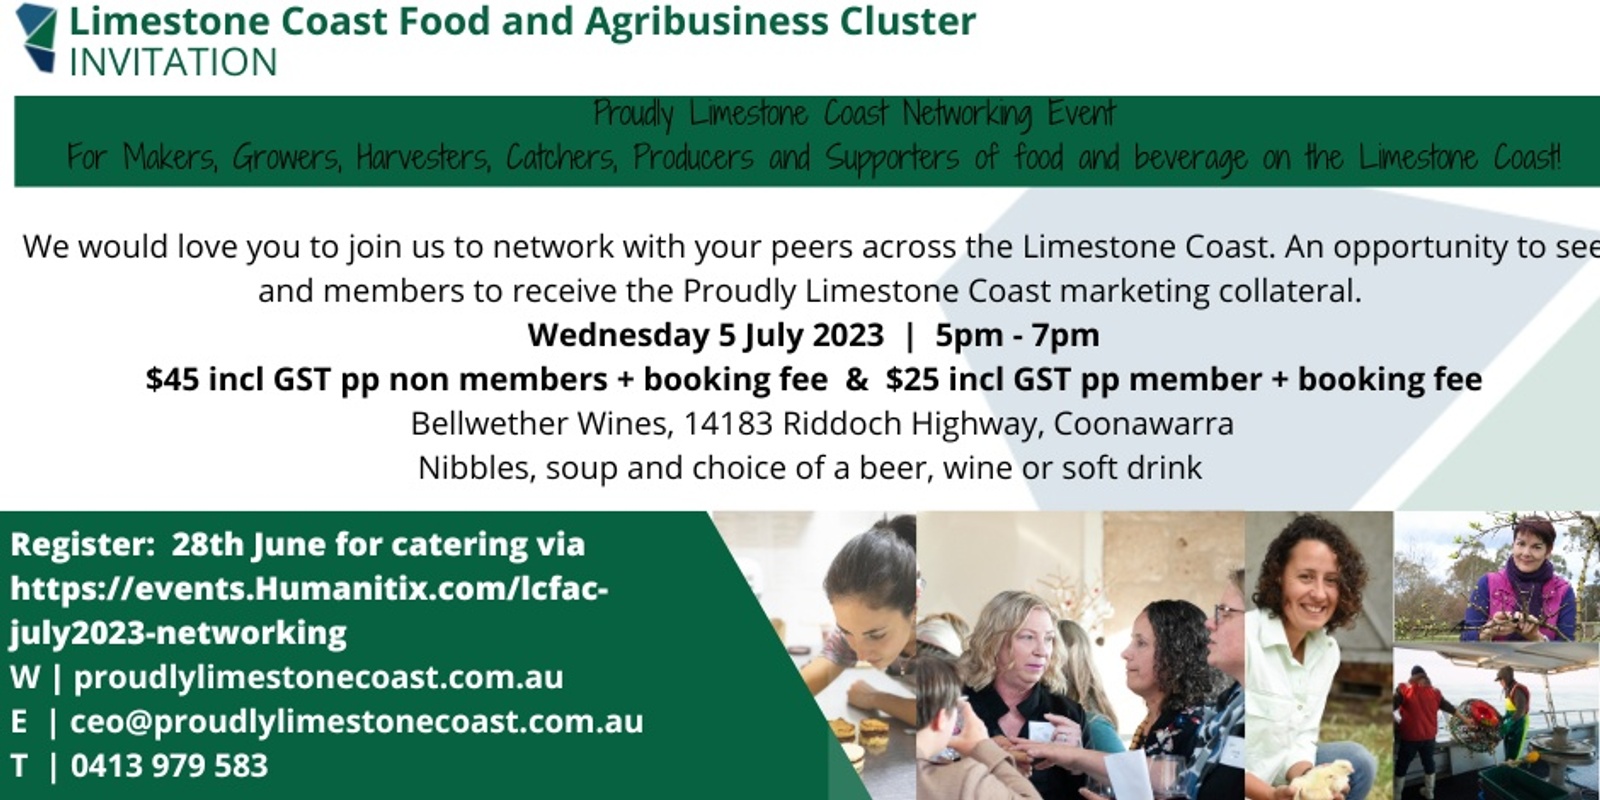 Banner image for Limestone Coast Food and Agribusiness Cluster Networking Event 